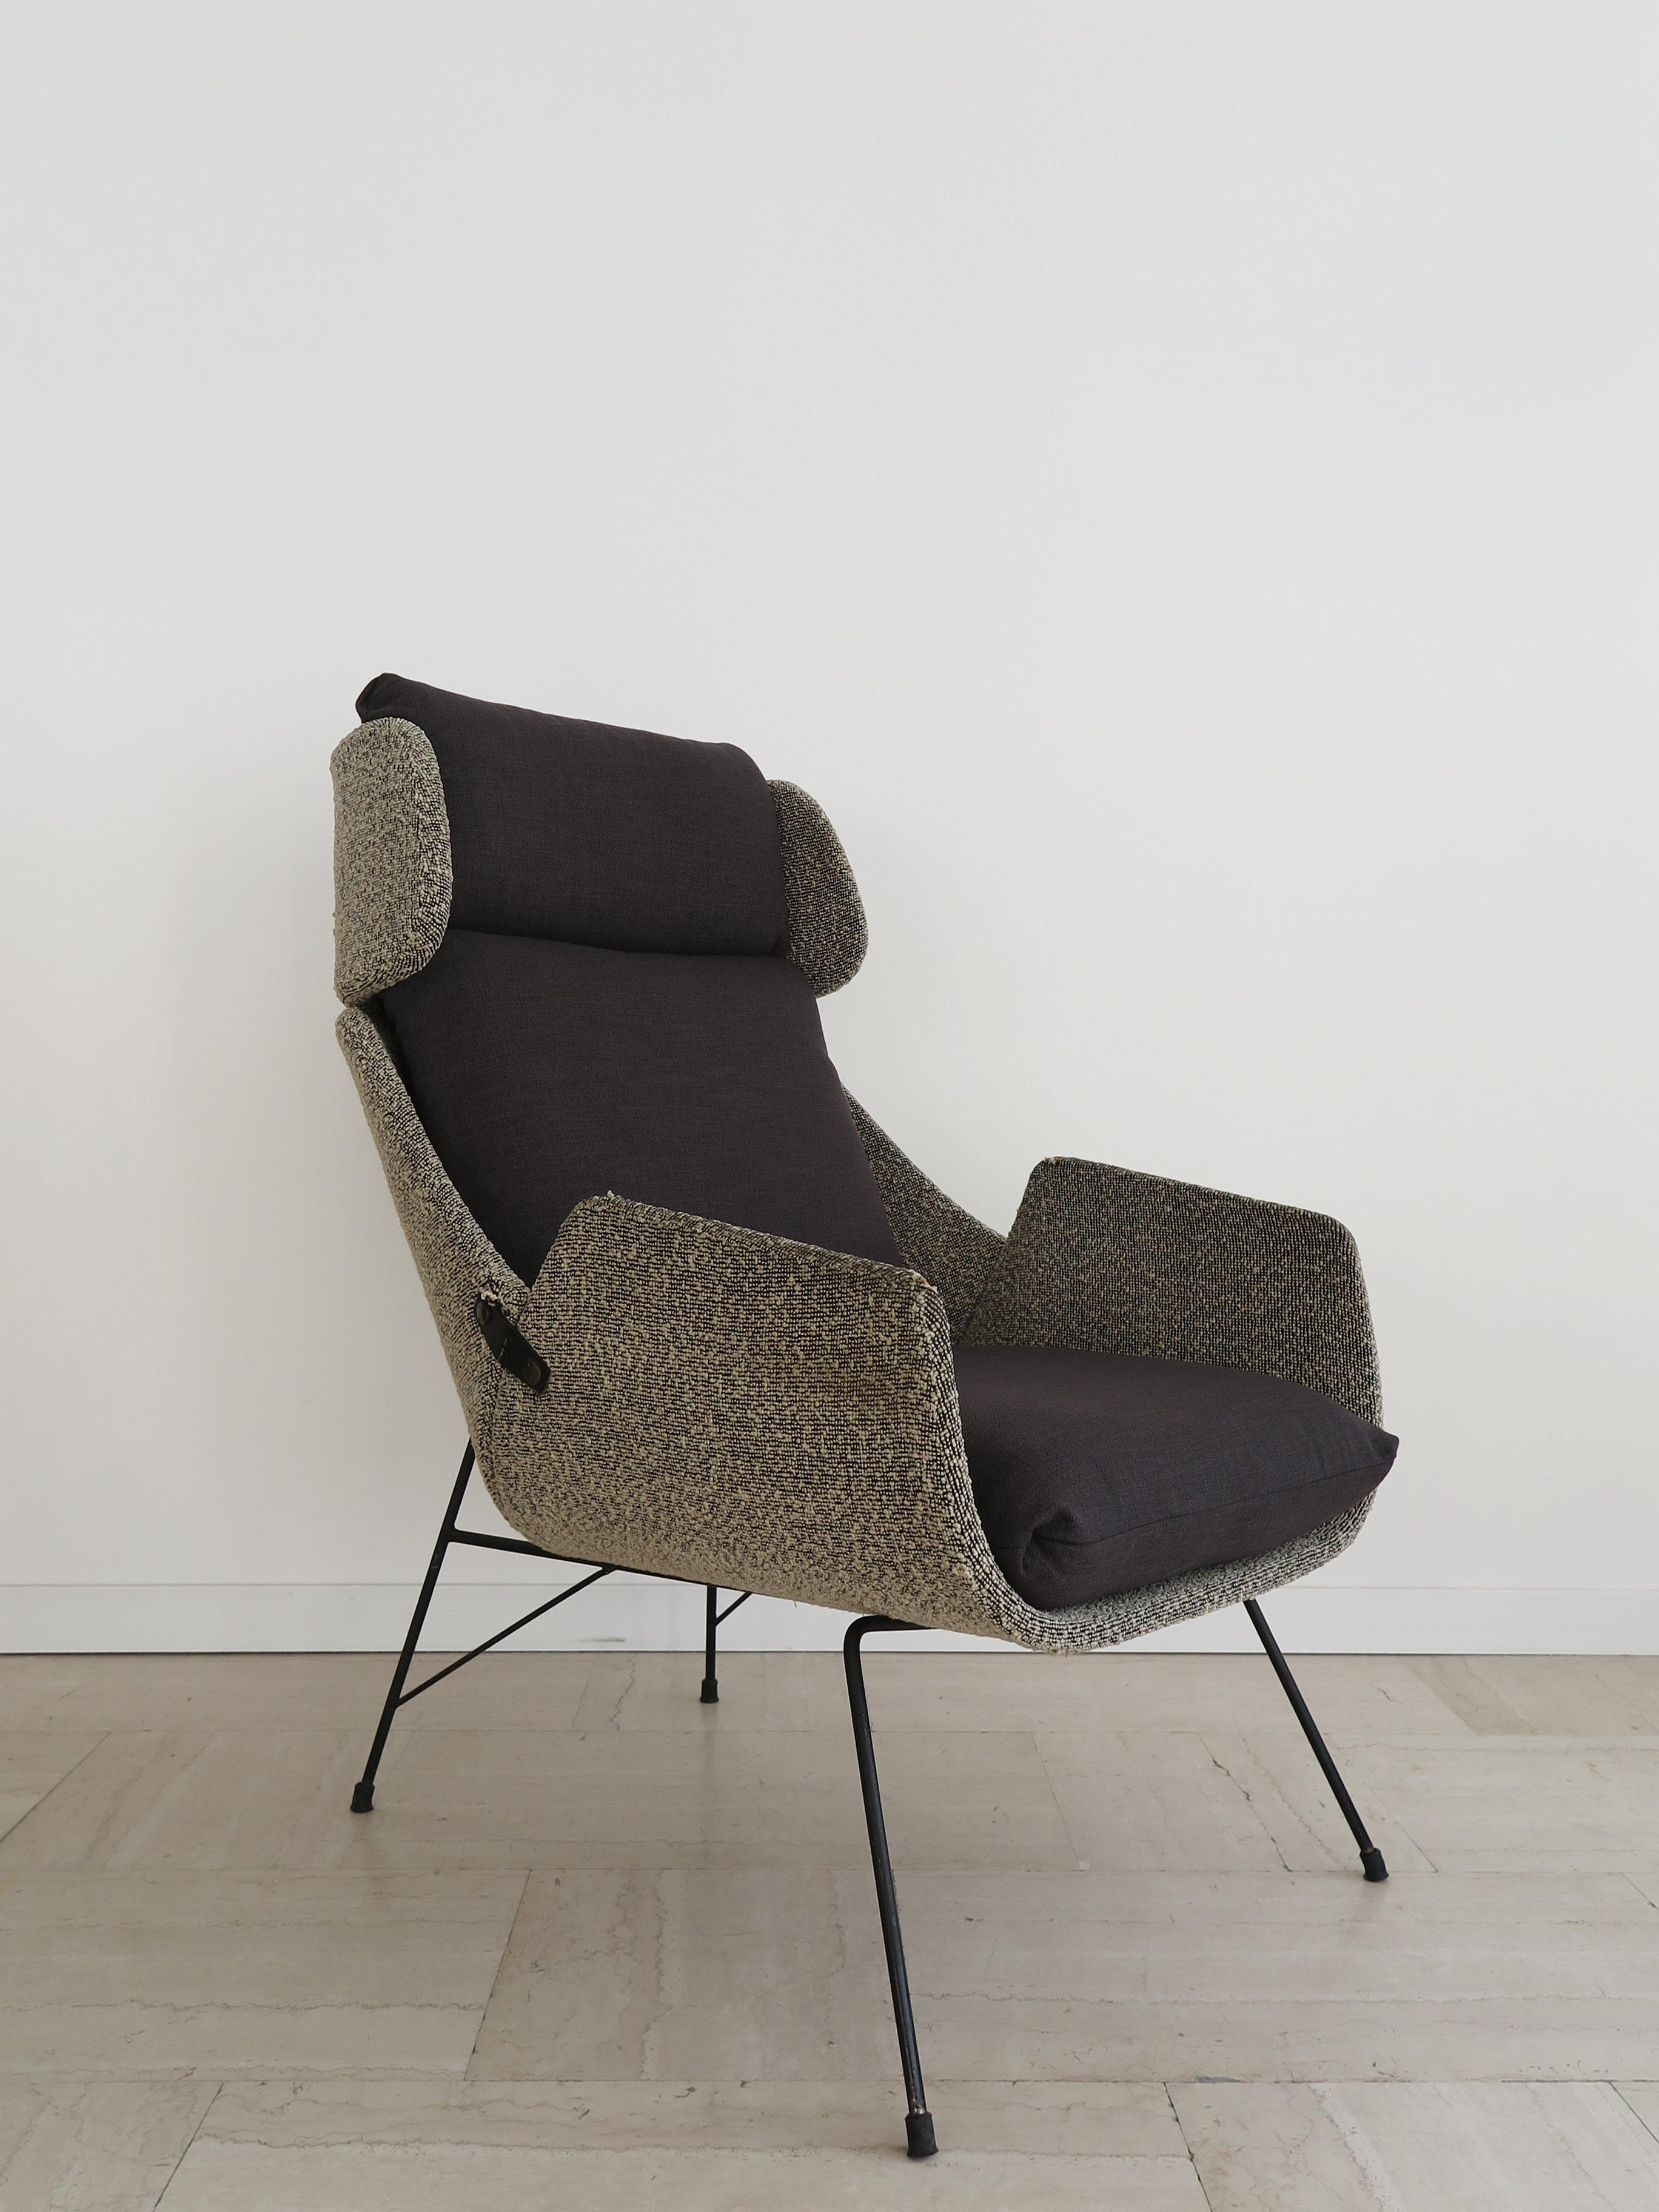 Italian Mid-Century Modern design very rare armchair designed by Augusto Bozzi for Saporiti Italia with painted metal rod frame and wooden shell upholstered in original wool fabric, the pillow has been made new, 1950s.

Reupholstering of the shell